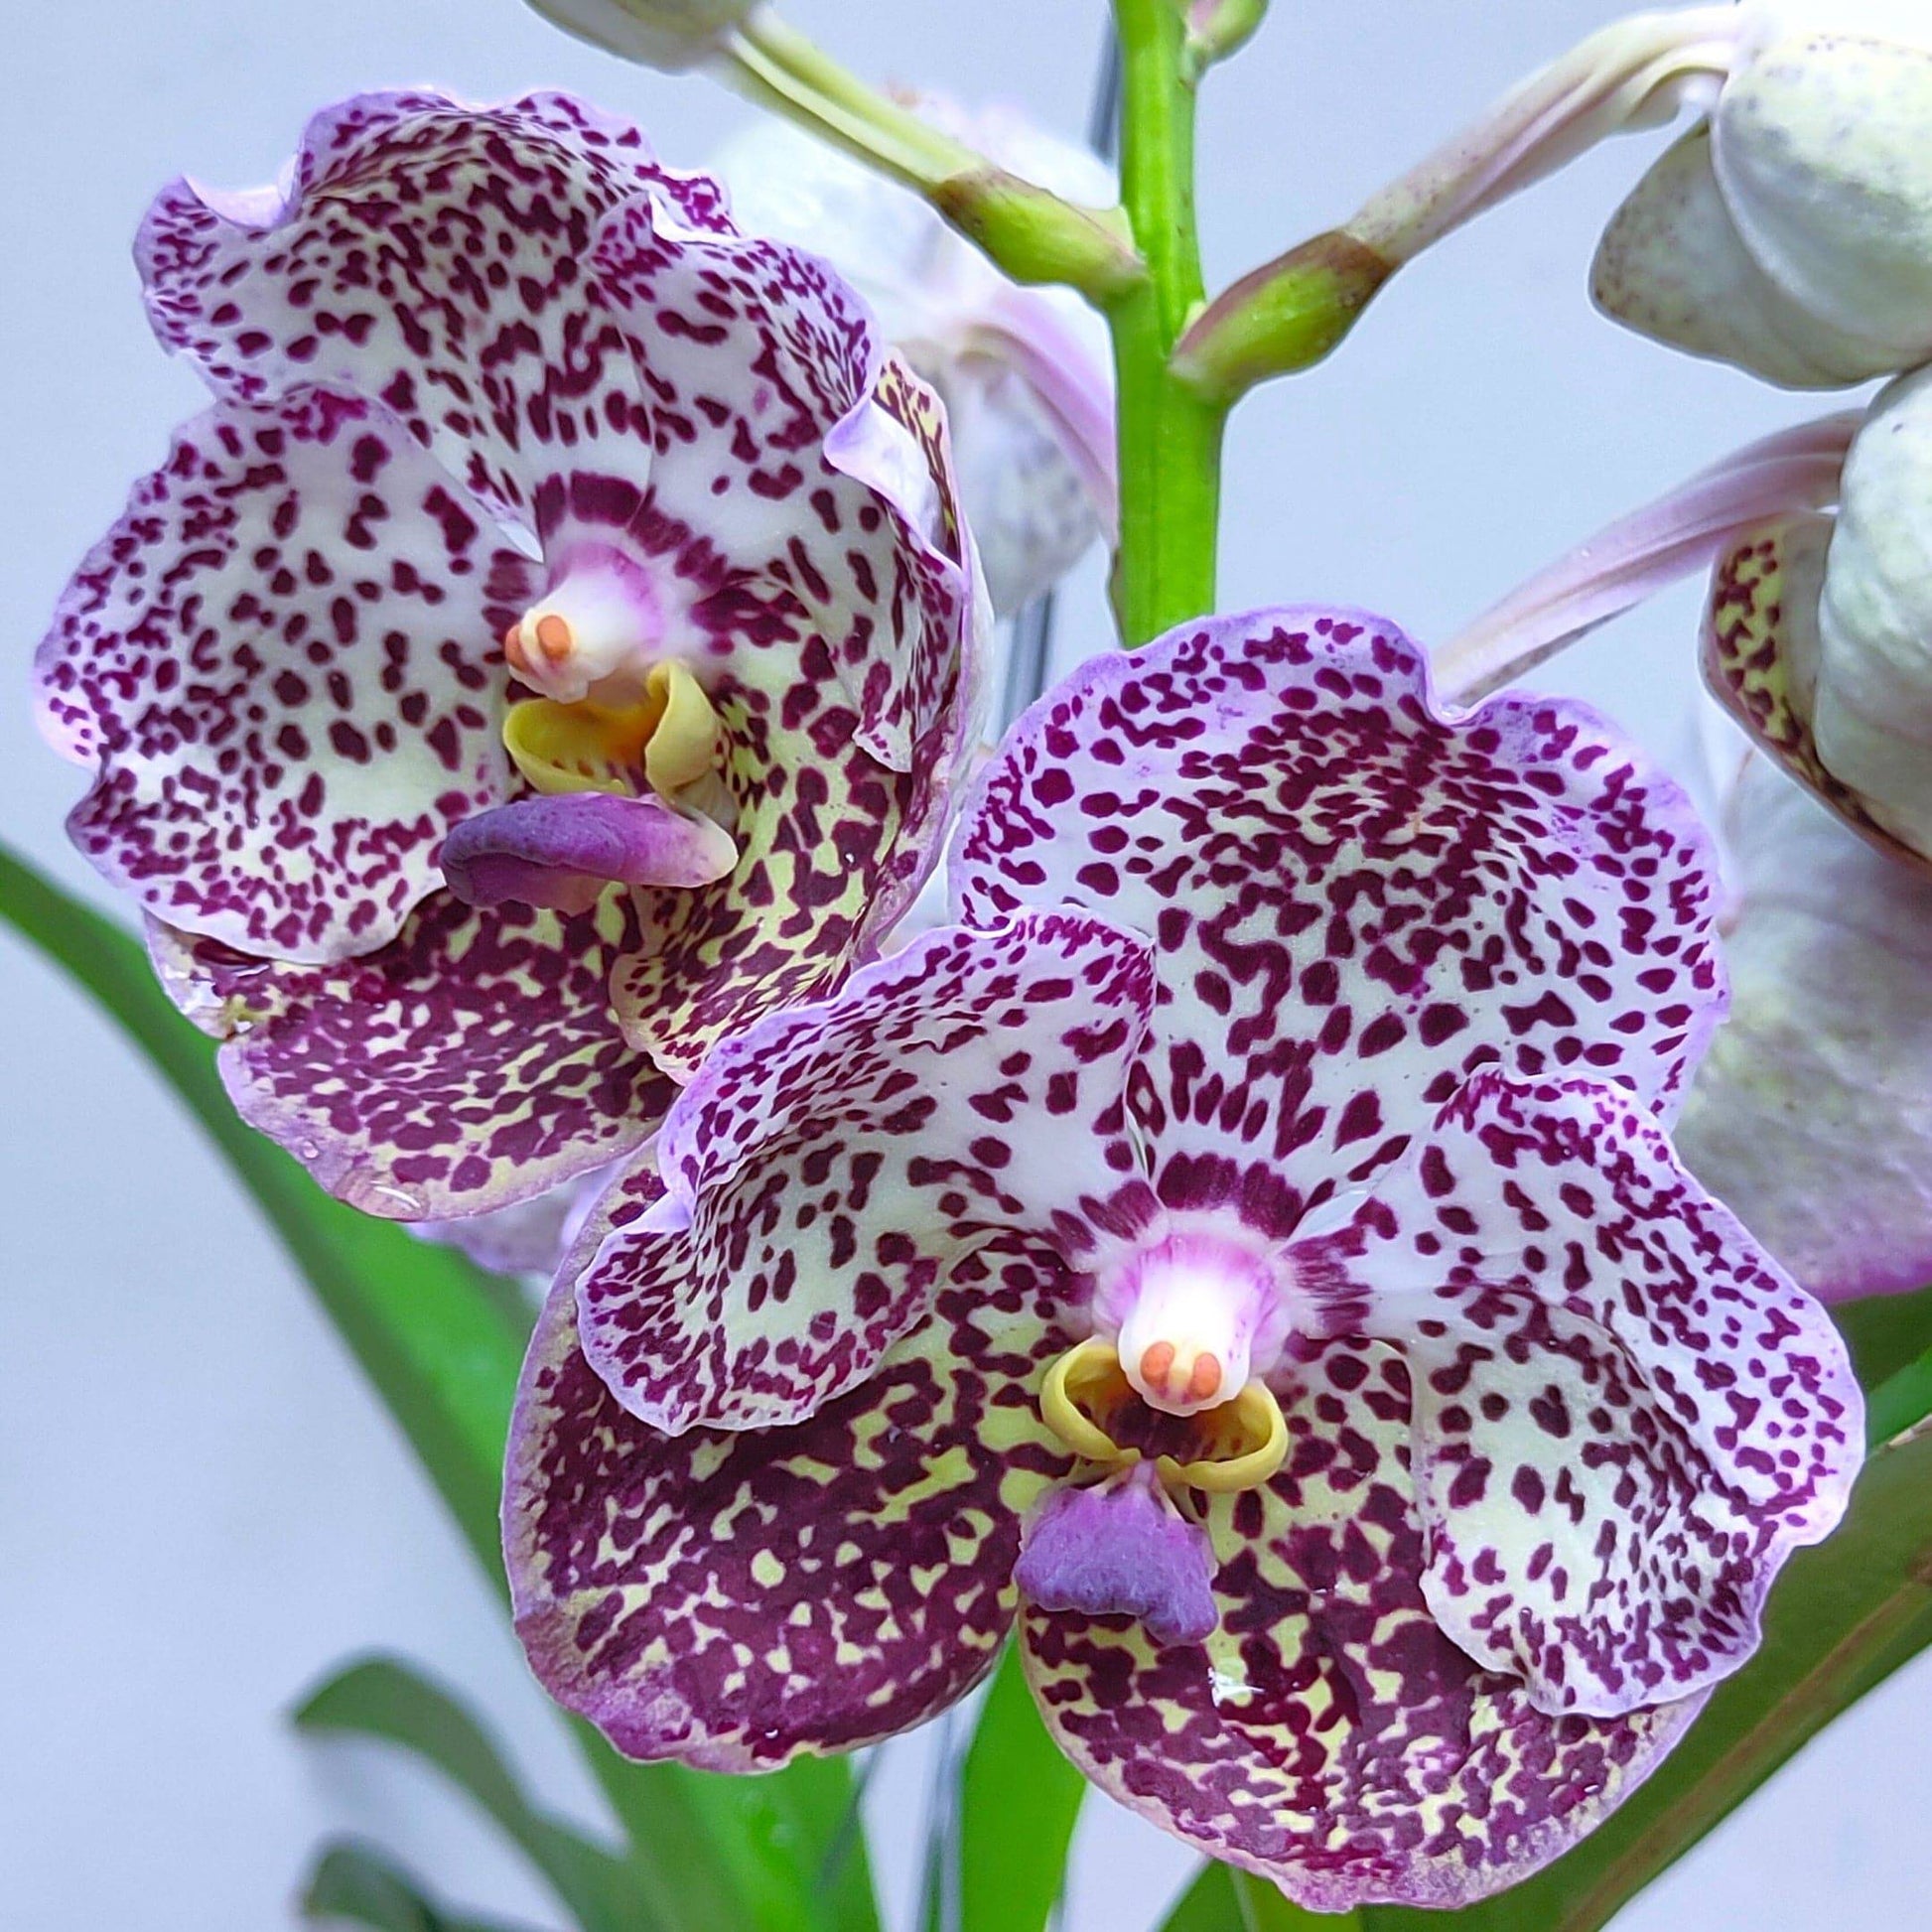 Vanda Wirat x Gordon Dillon - Without Flowers | BS - Buy Orchids Plants Online by Orchid-Tree.com